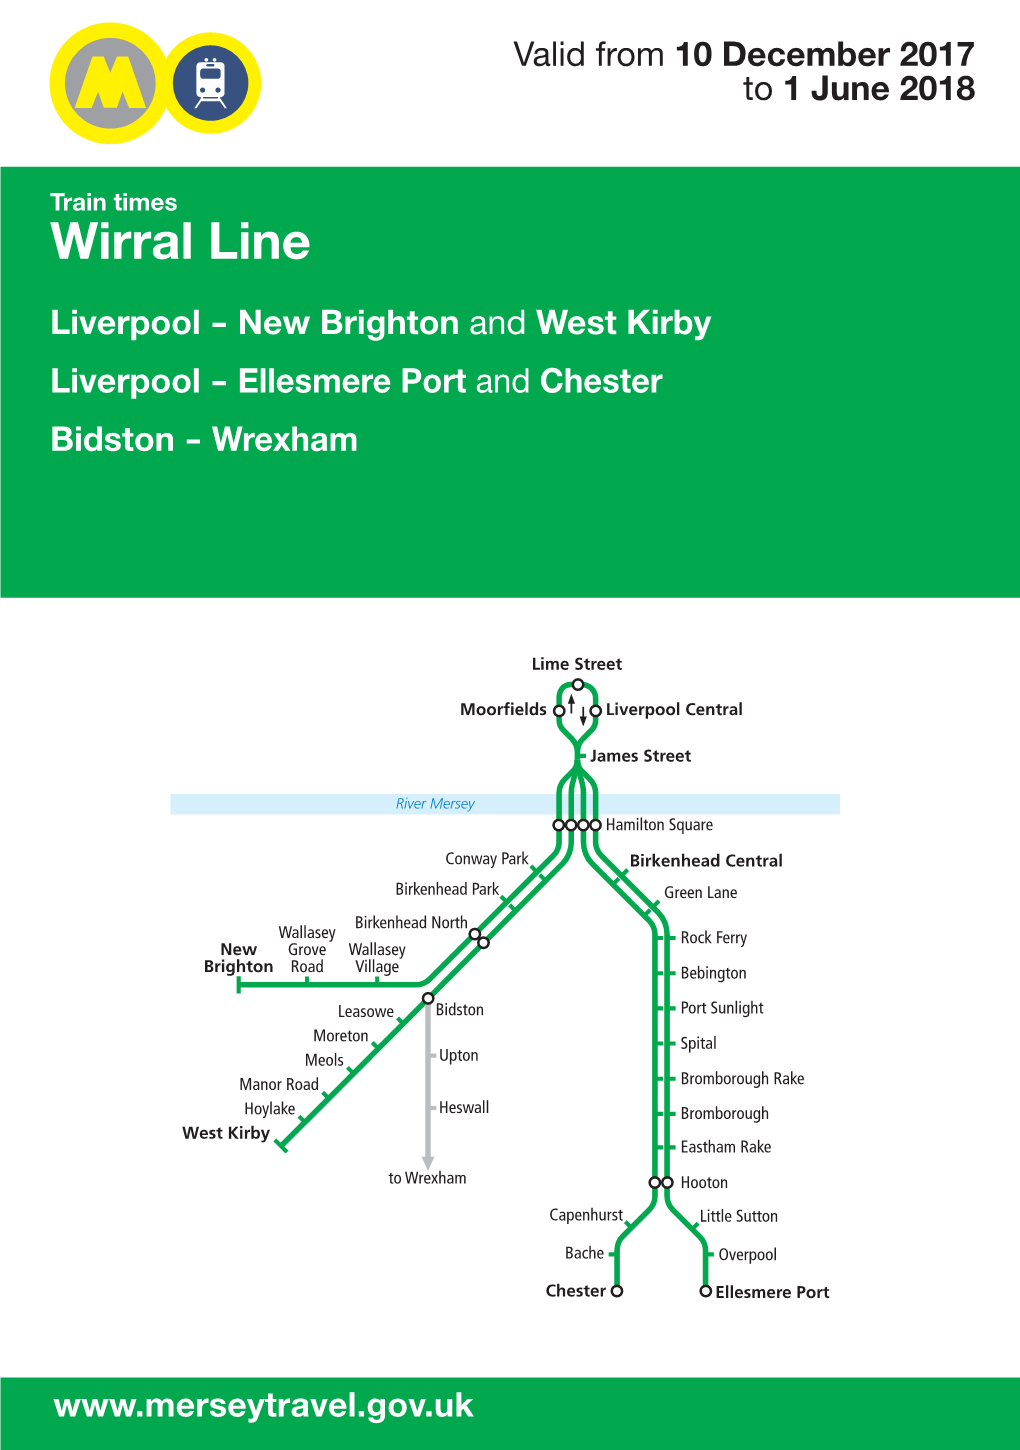 Wirral Line Cover - Dec 2017 Rail Covers 06/11/2017 15:03 Page 1